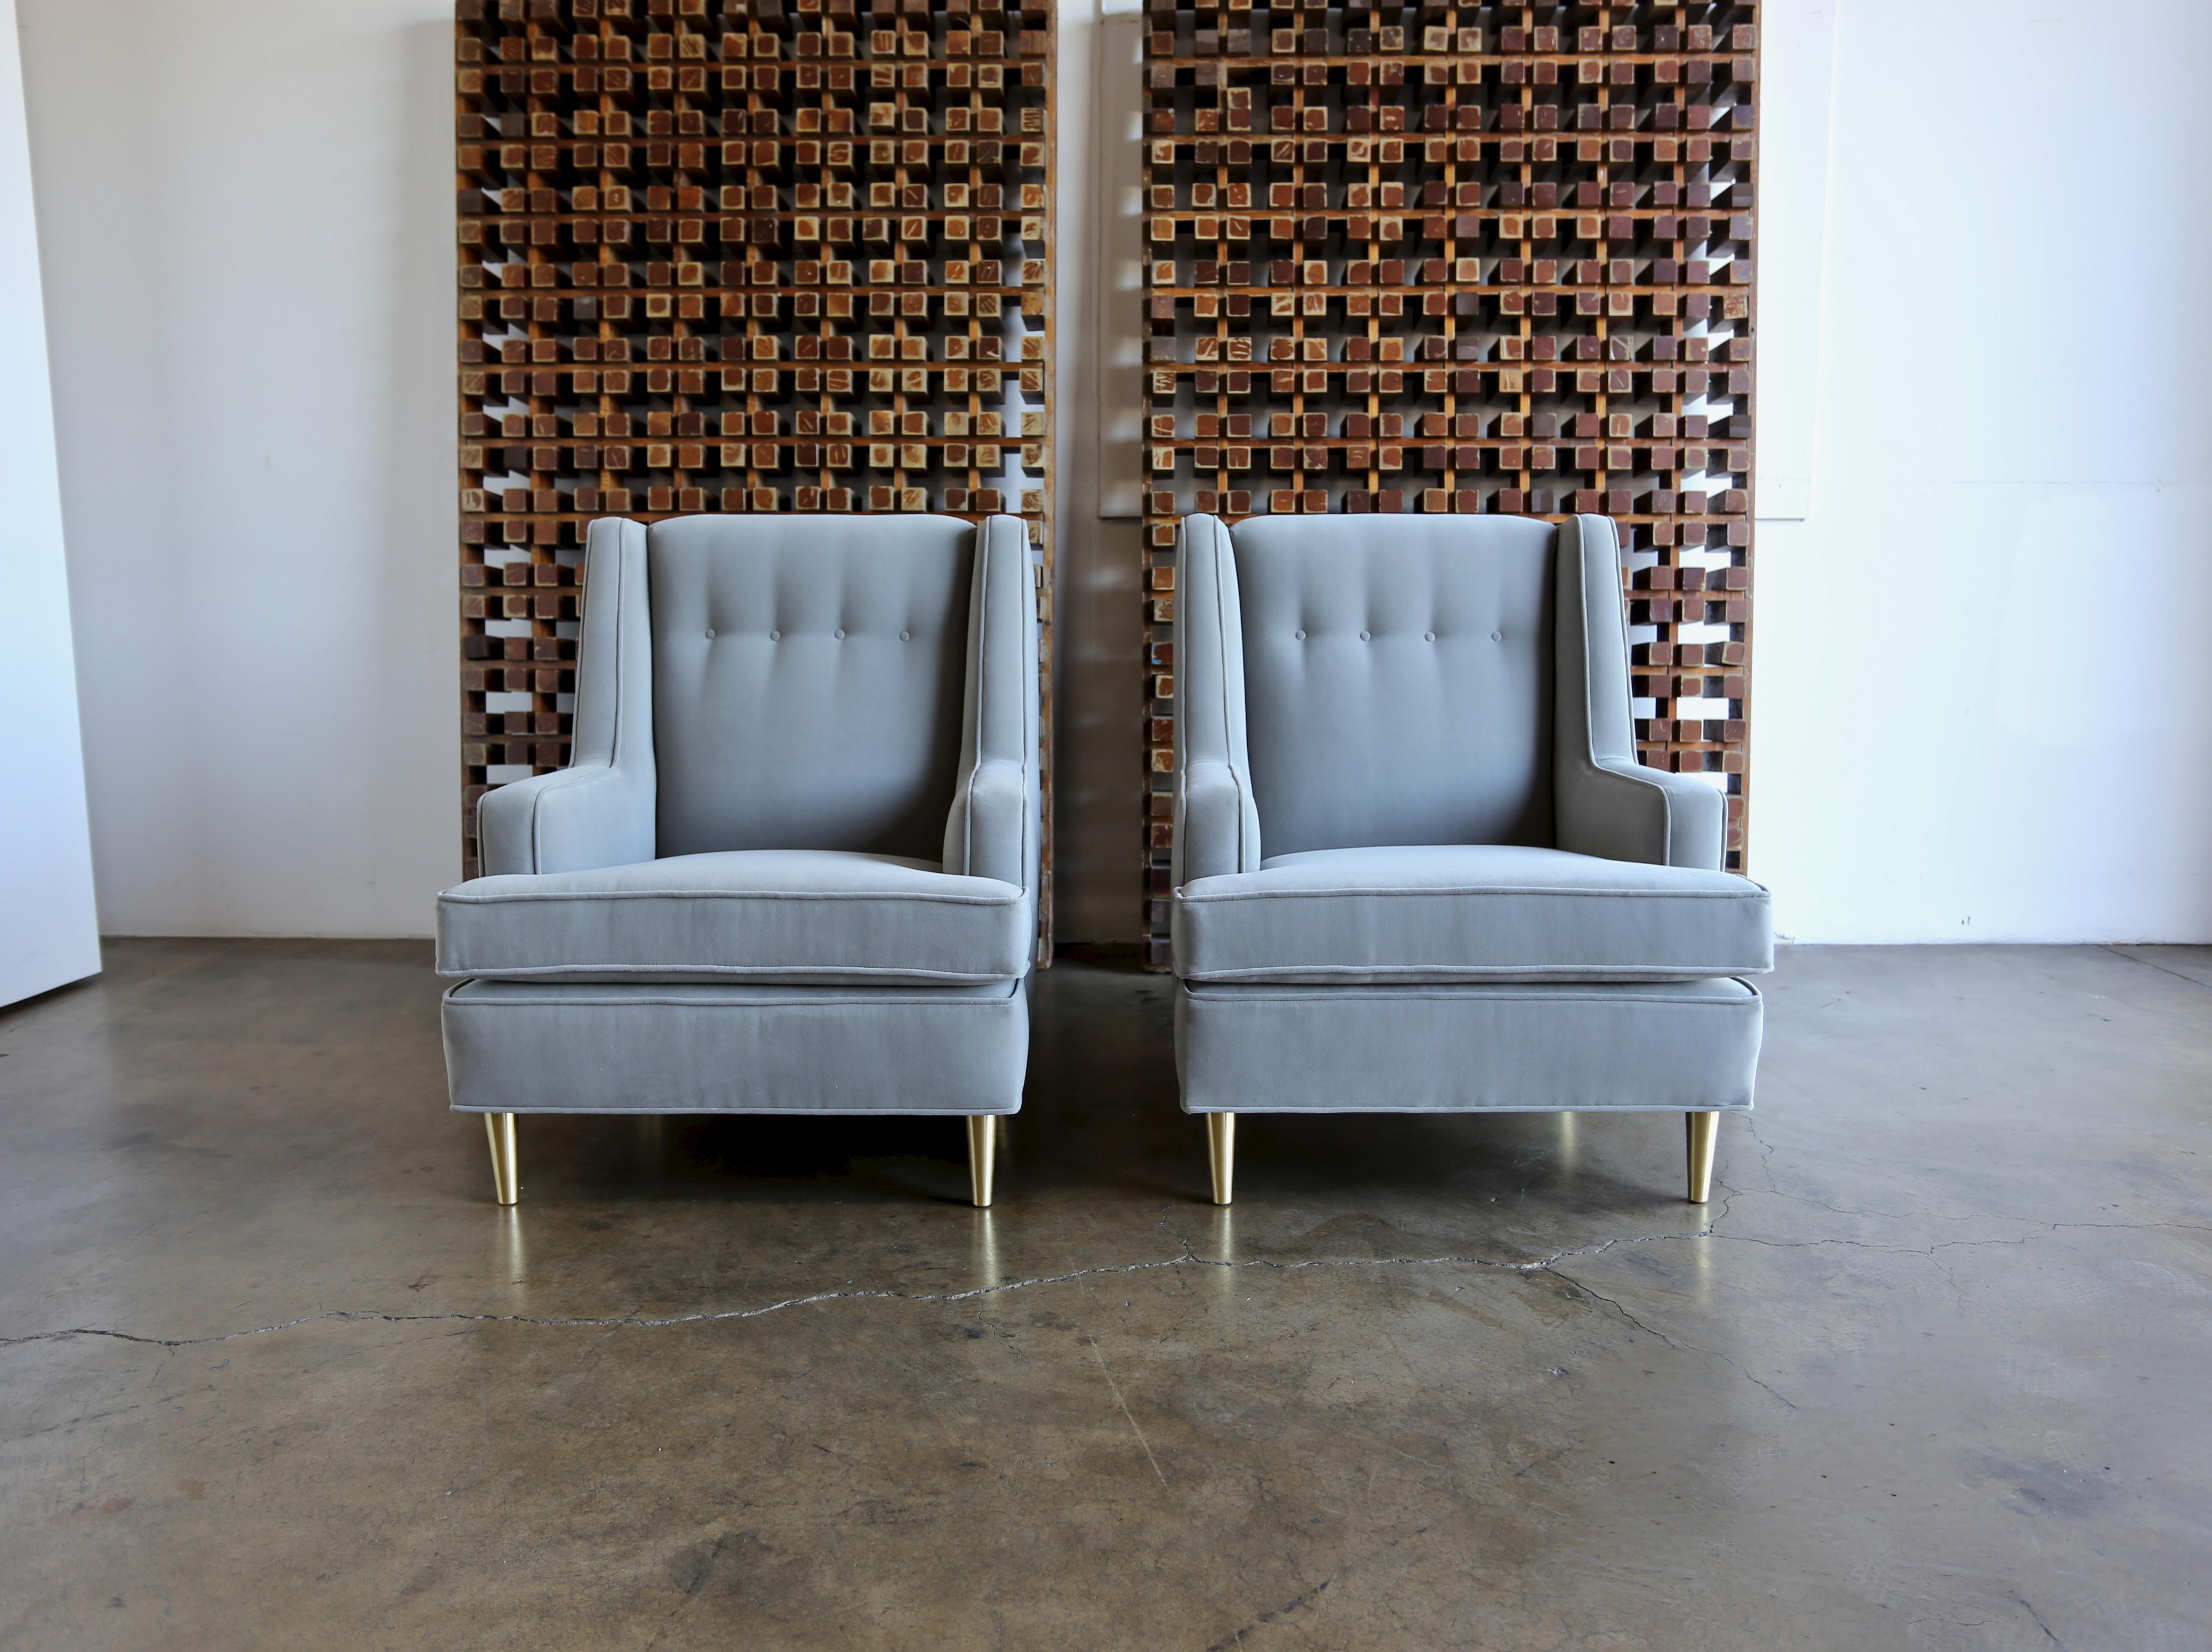 Pair of Lounge Chairs by Edward Wormley for Dunbar im Zustand „Gut“ in Costa Mesa, CA